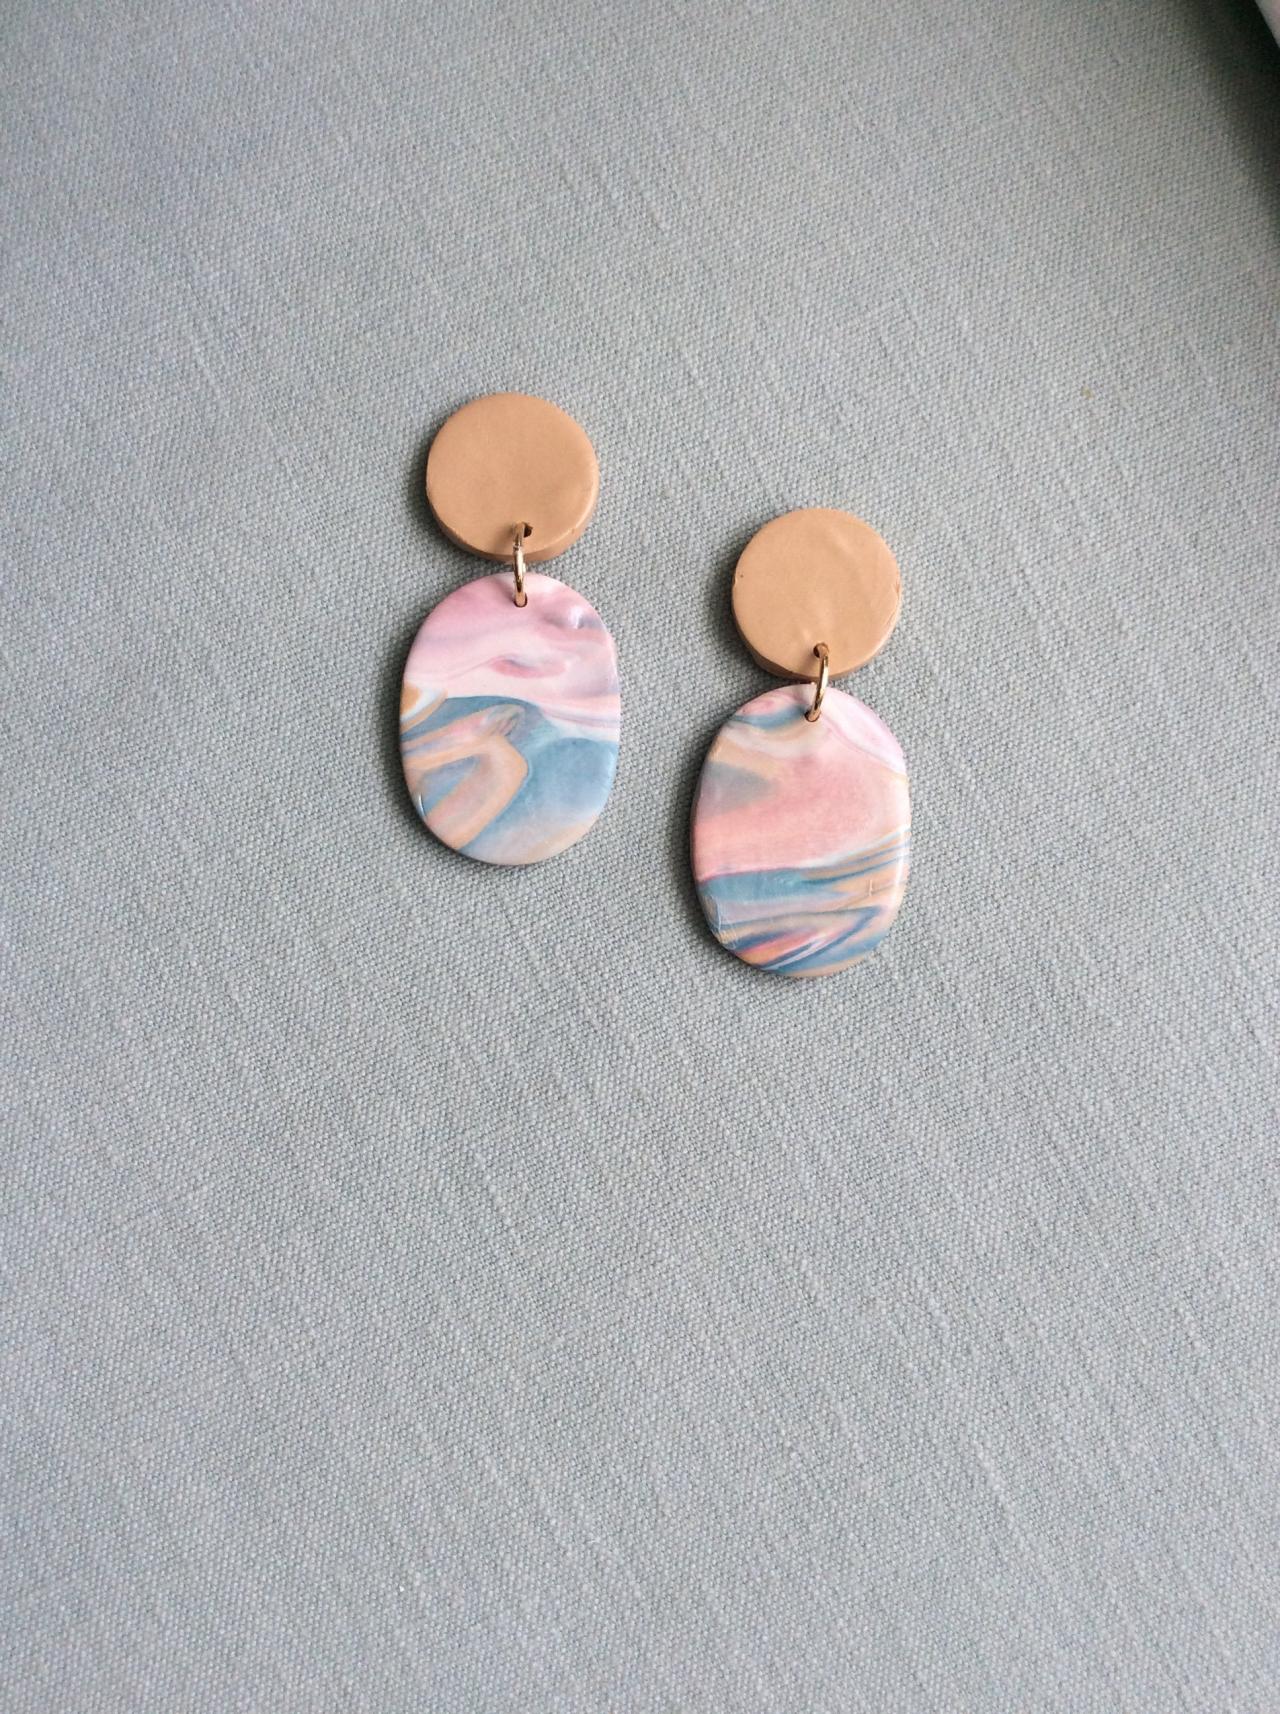 Binta In Teal, Mauve, Beige, And Cream Polymer Clay Earrings | Modern Contemporary Polymer Clay Drop Earrings